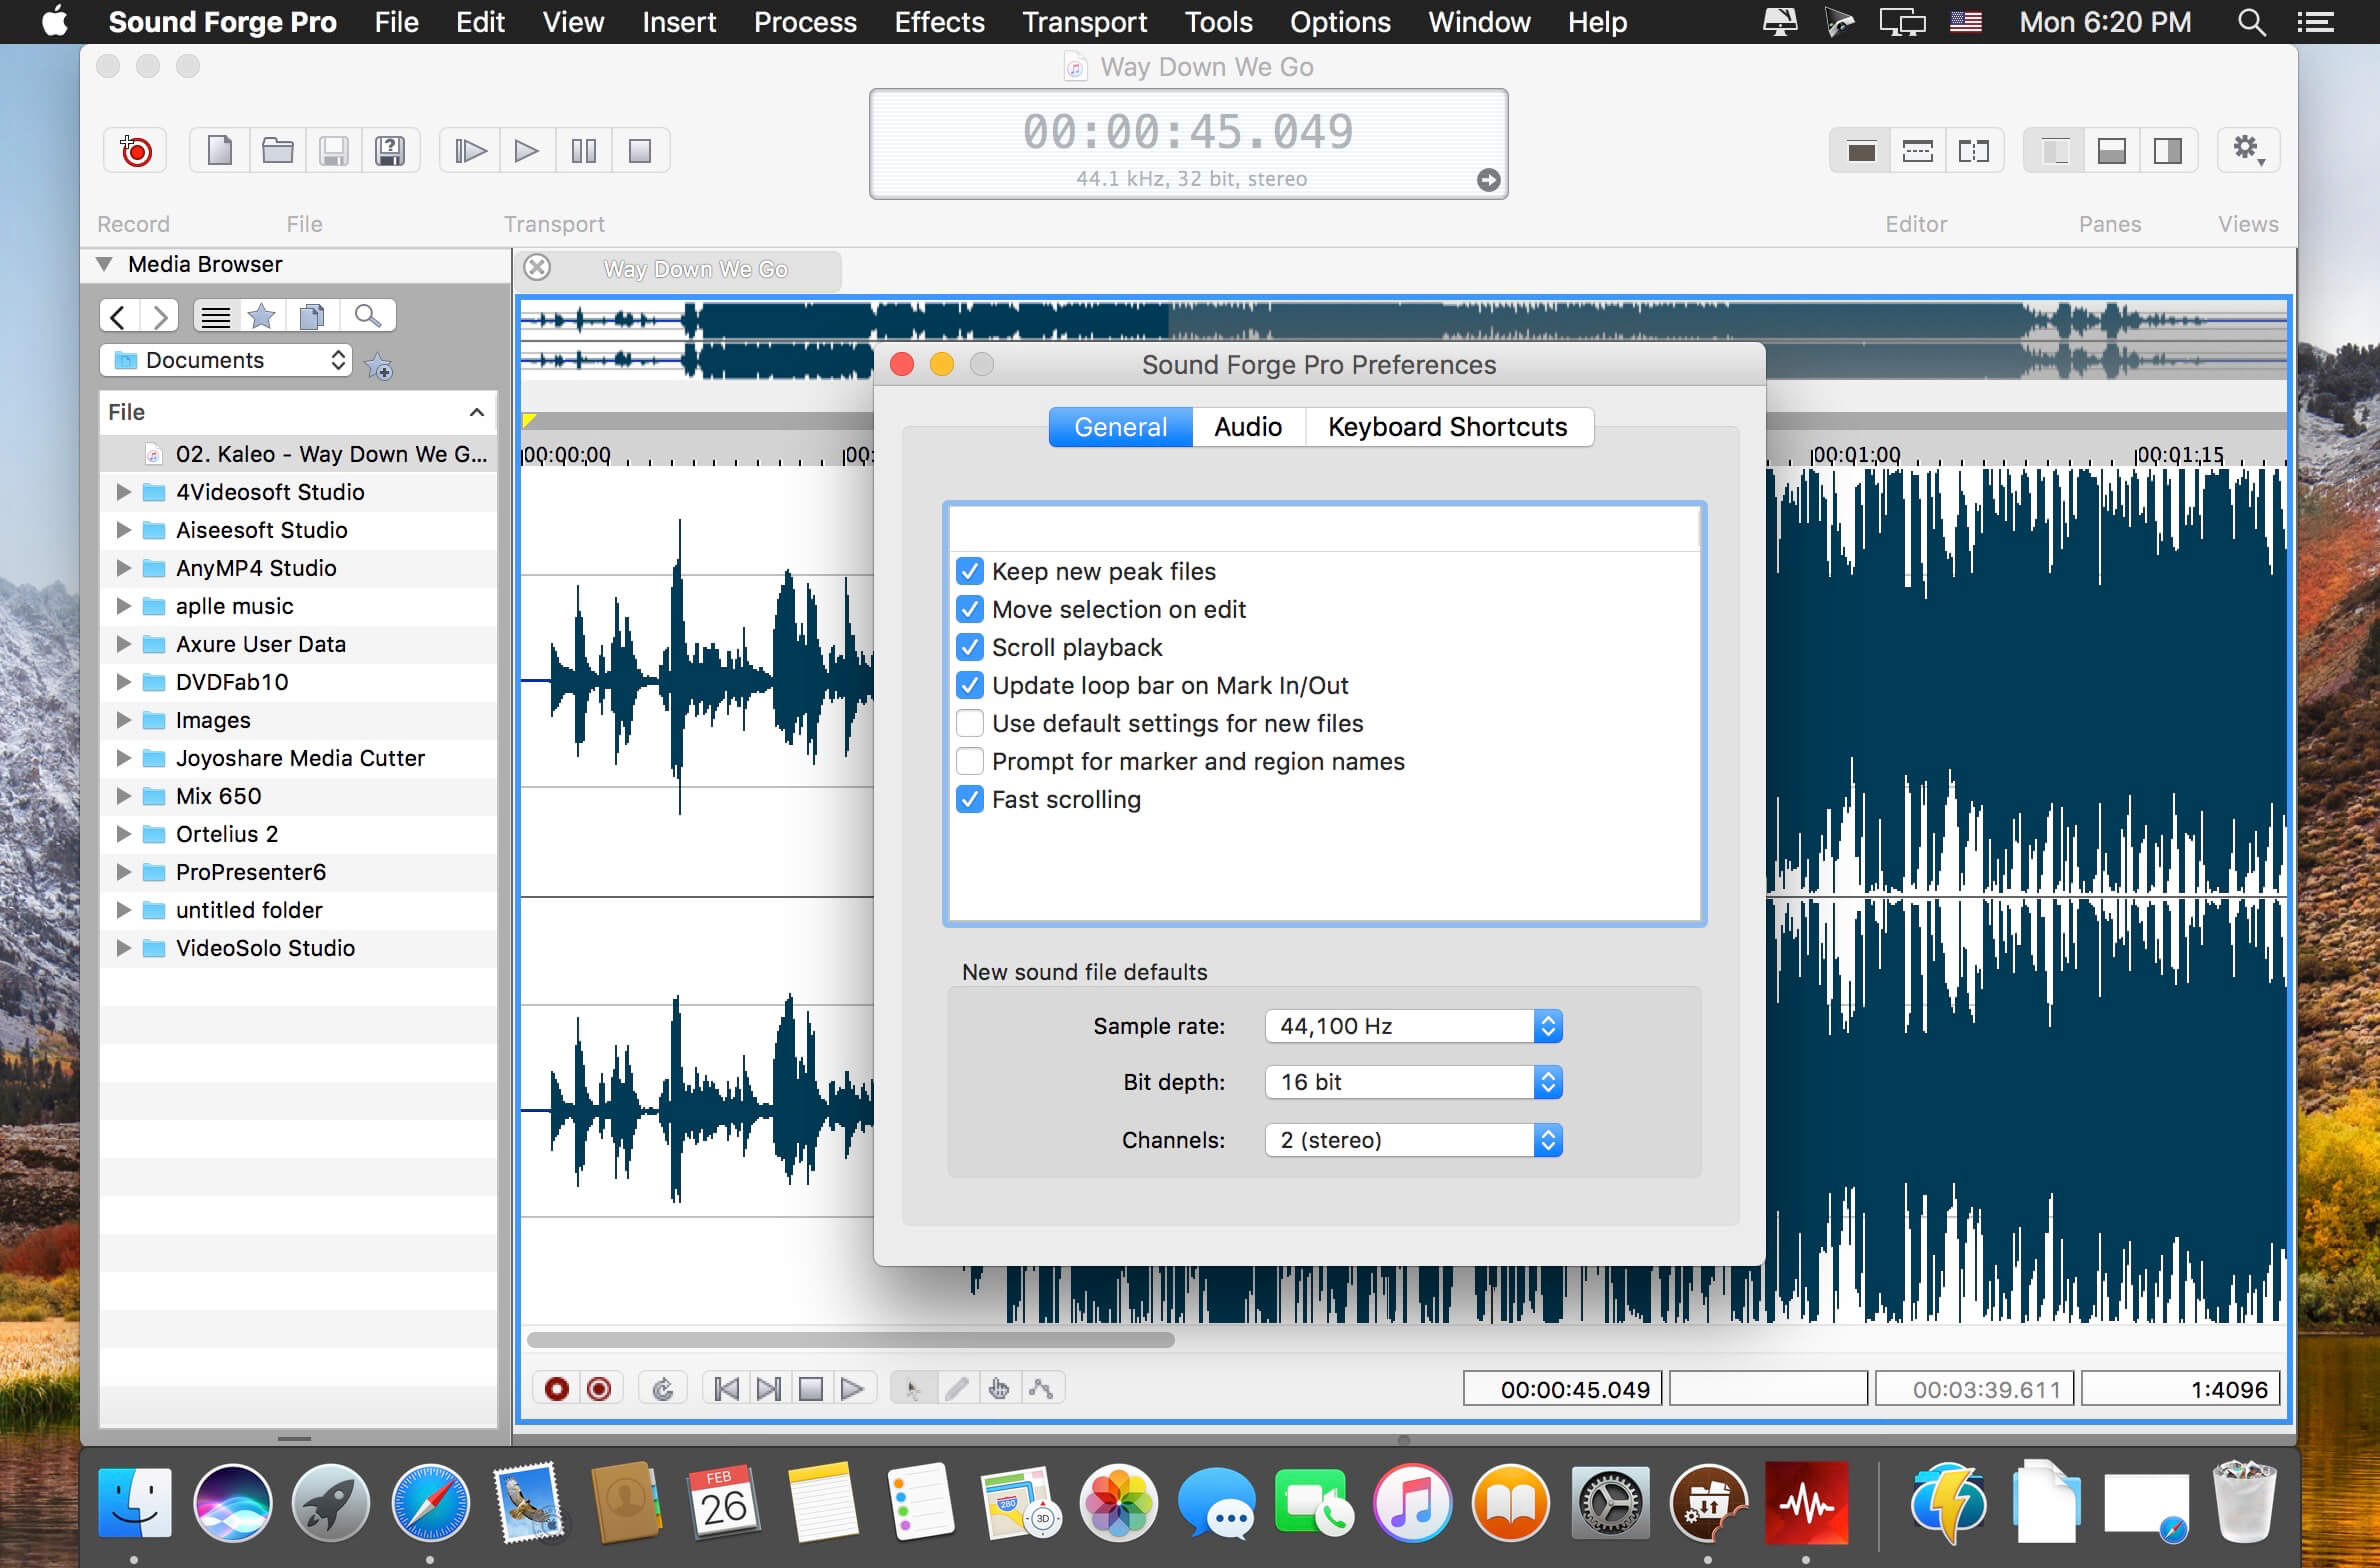 for mac download MAGIX / Steinberg SpectraLayers Pro 10.0.0.327